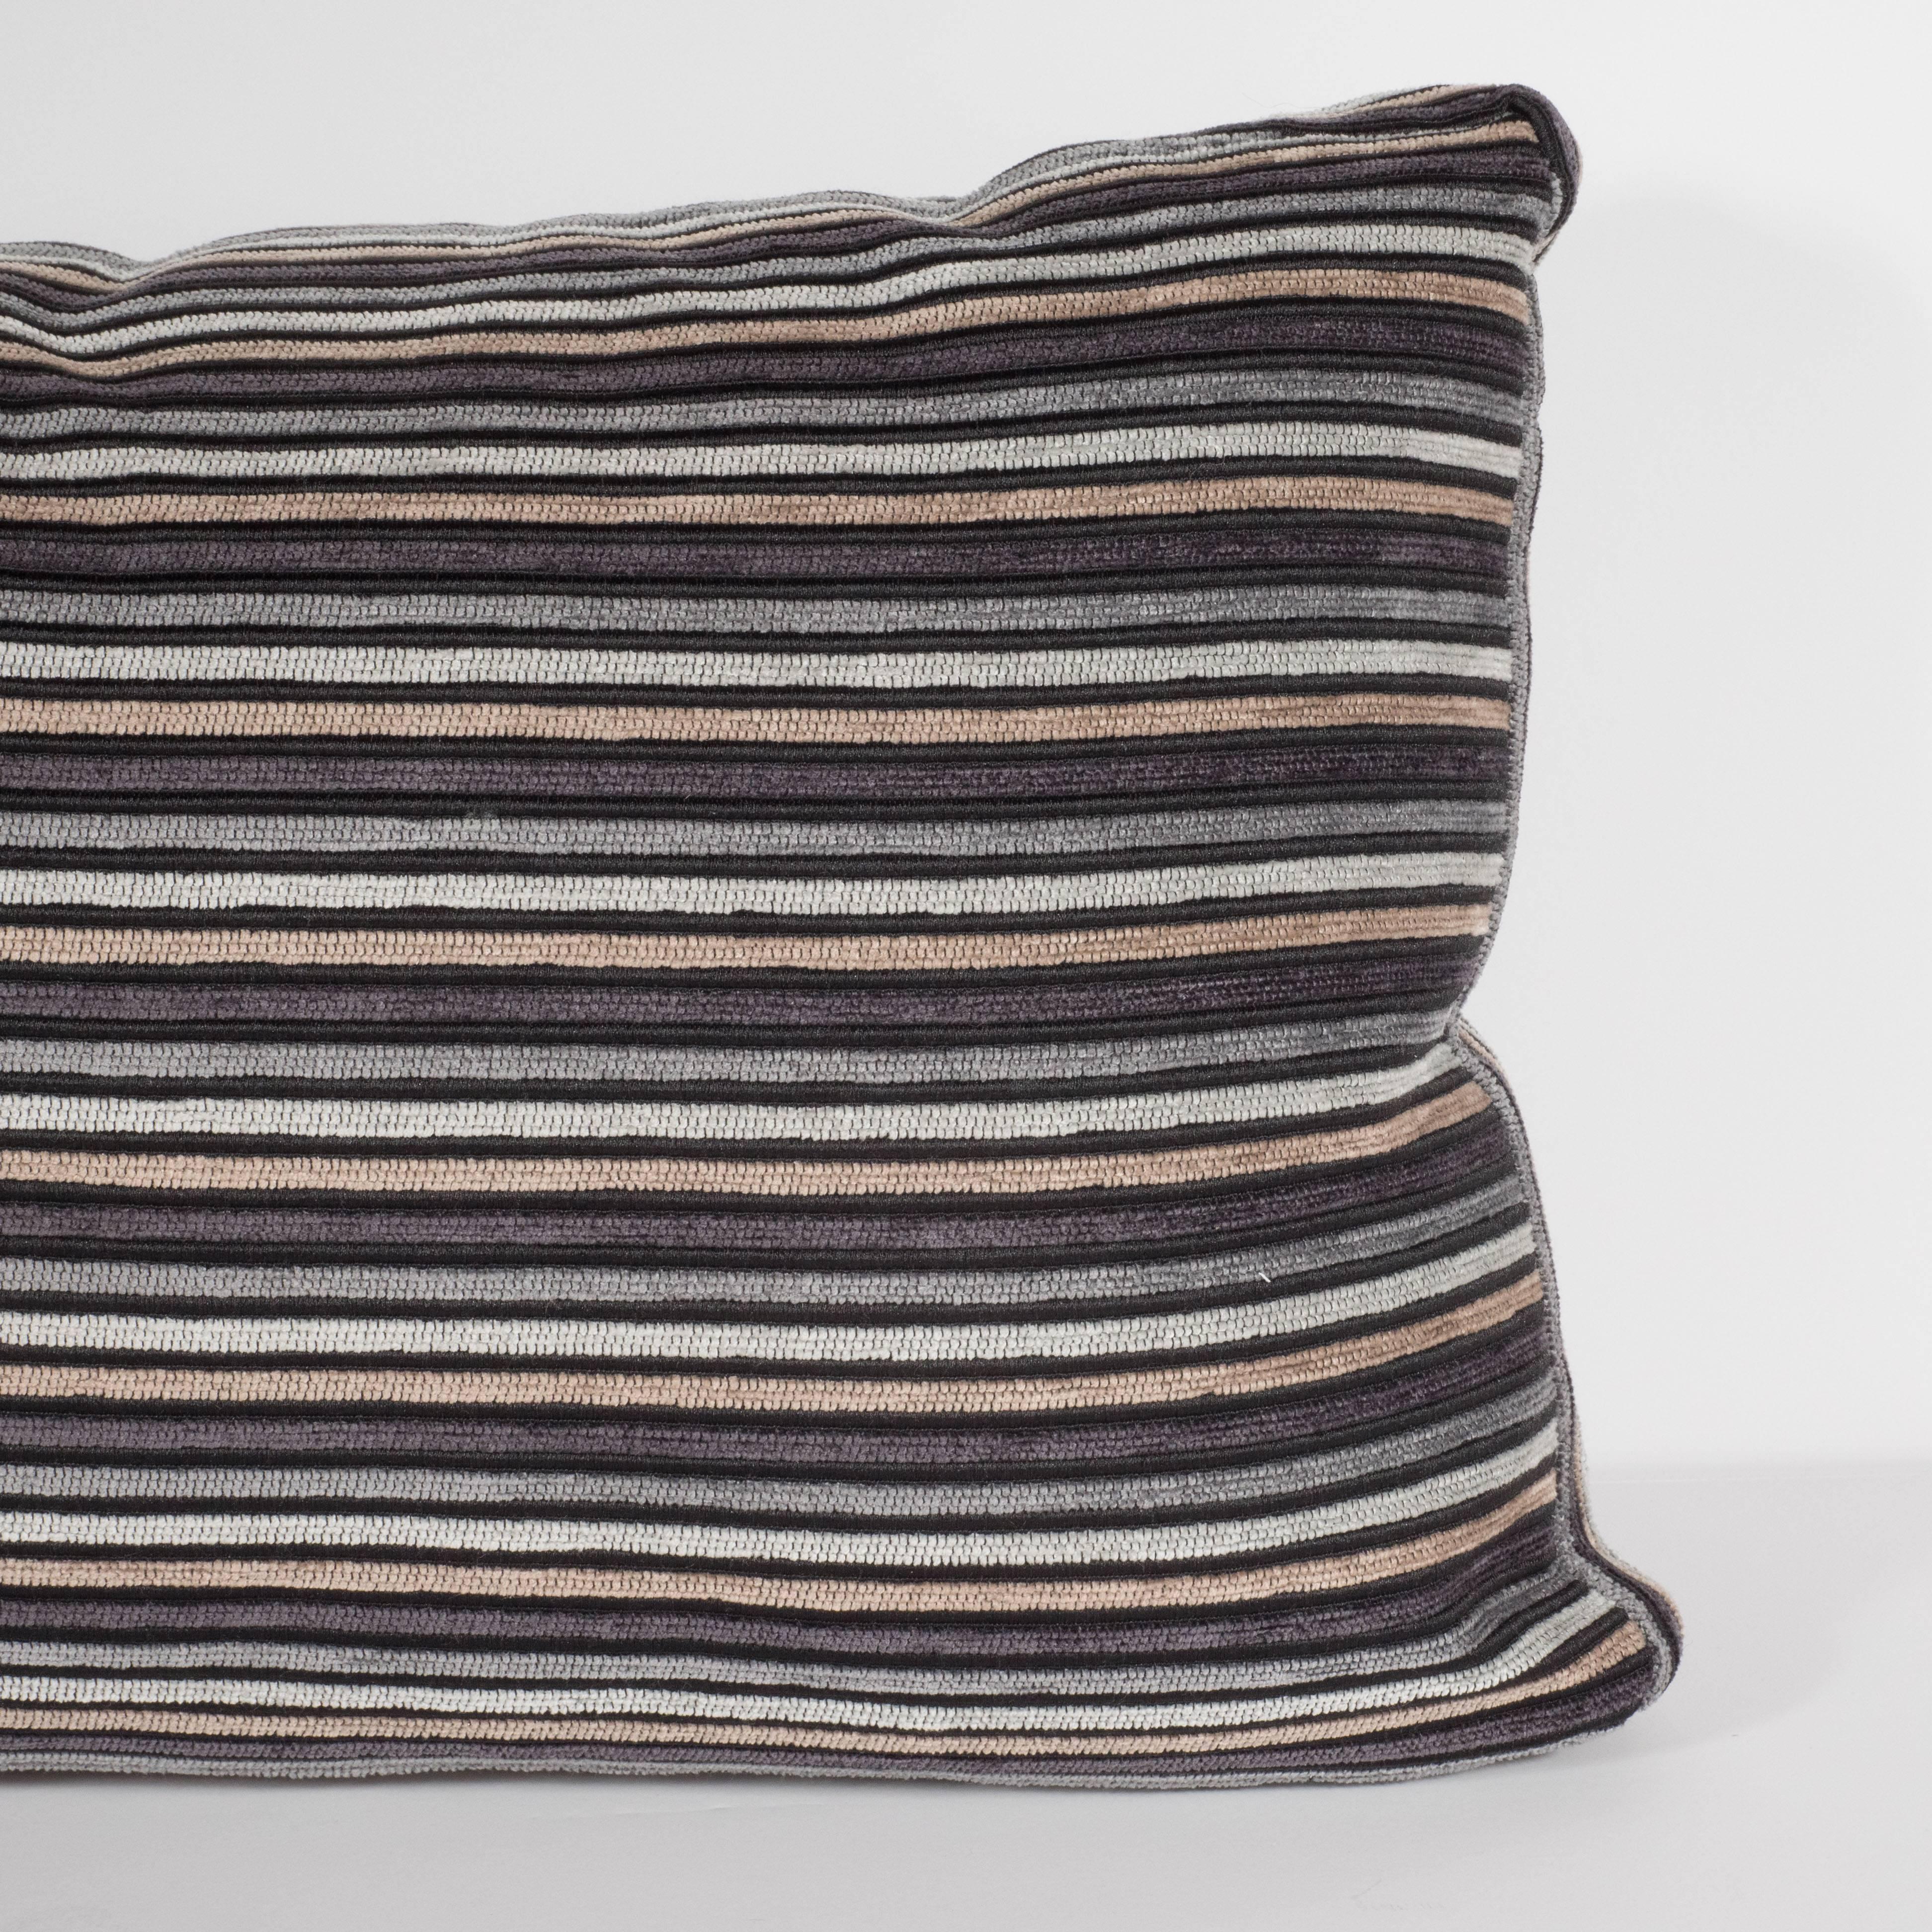 Pair of Modern Rectangular Striped Velvet Pillows in Neutral Silver & Gold Tones In Excellent Condition For Sale In New York, NY